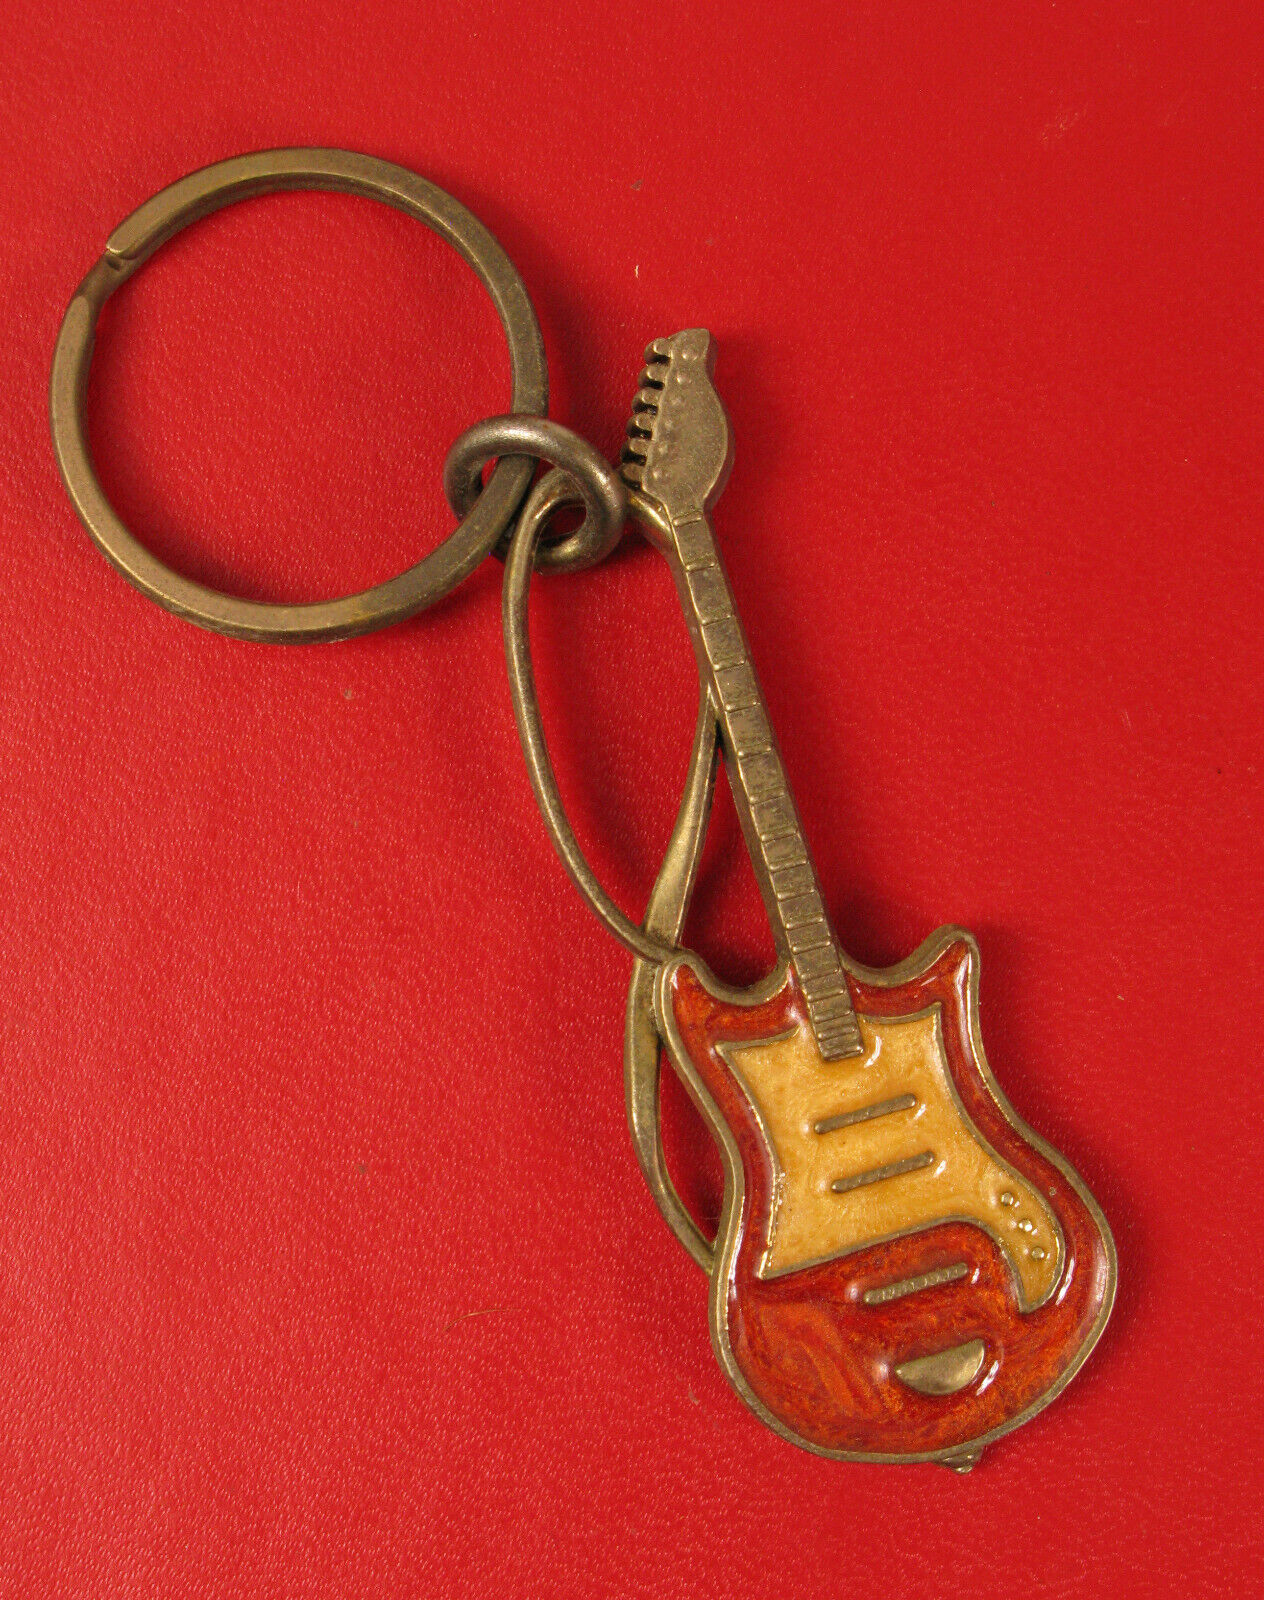 VINTAGE MUSICAL MUSICIAN GUITAR AUTOMOTIVE KEY CHAIN MUSIC SONG BAND SING NICE 